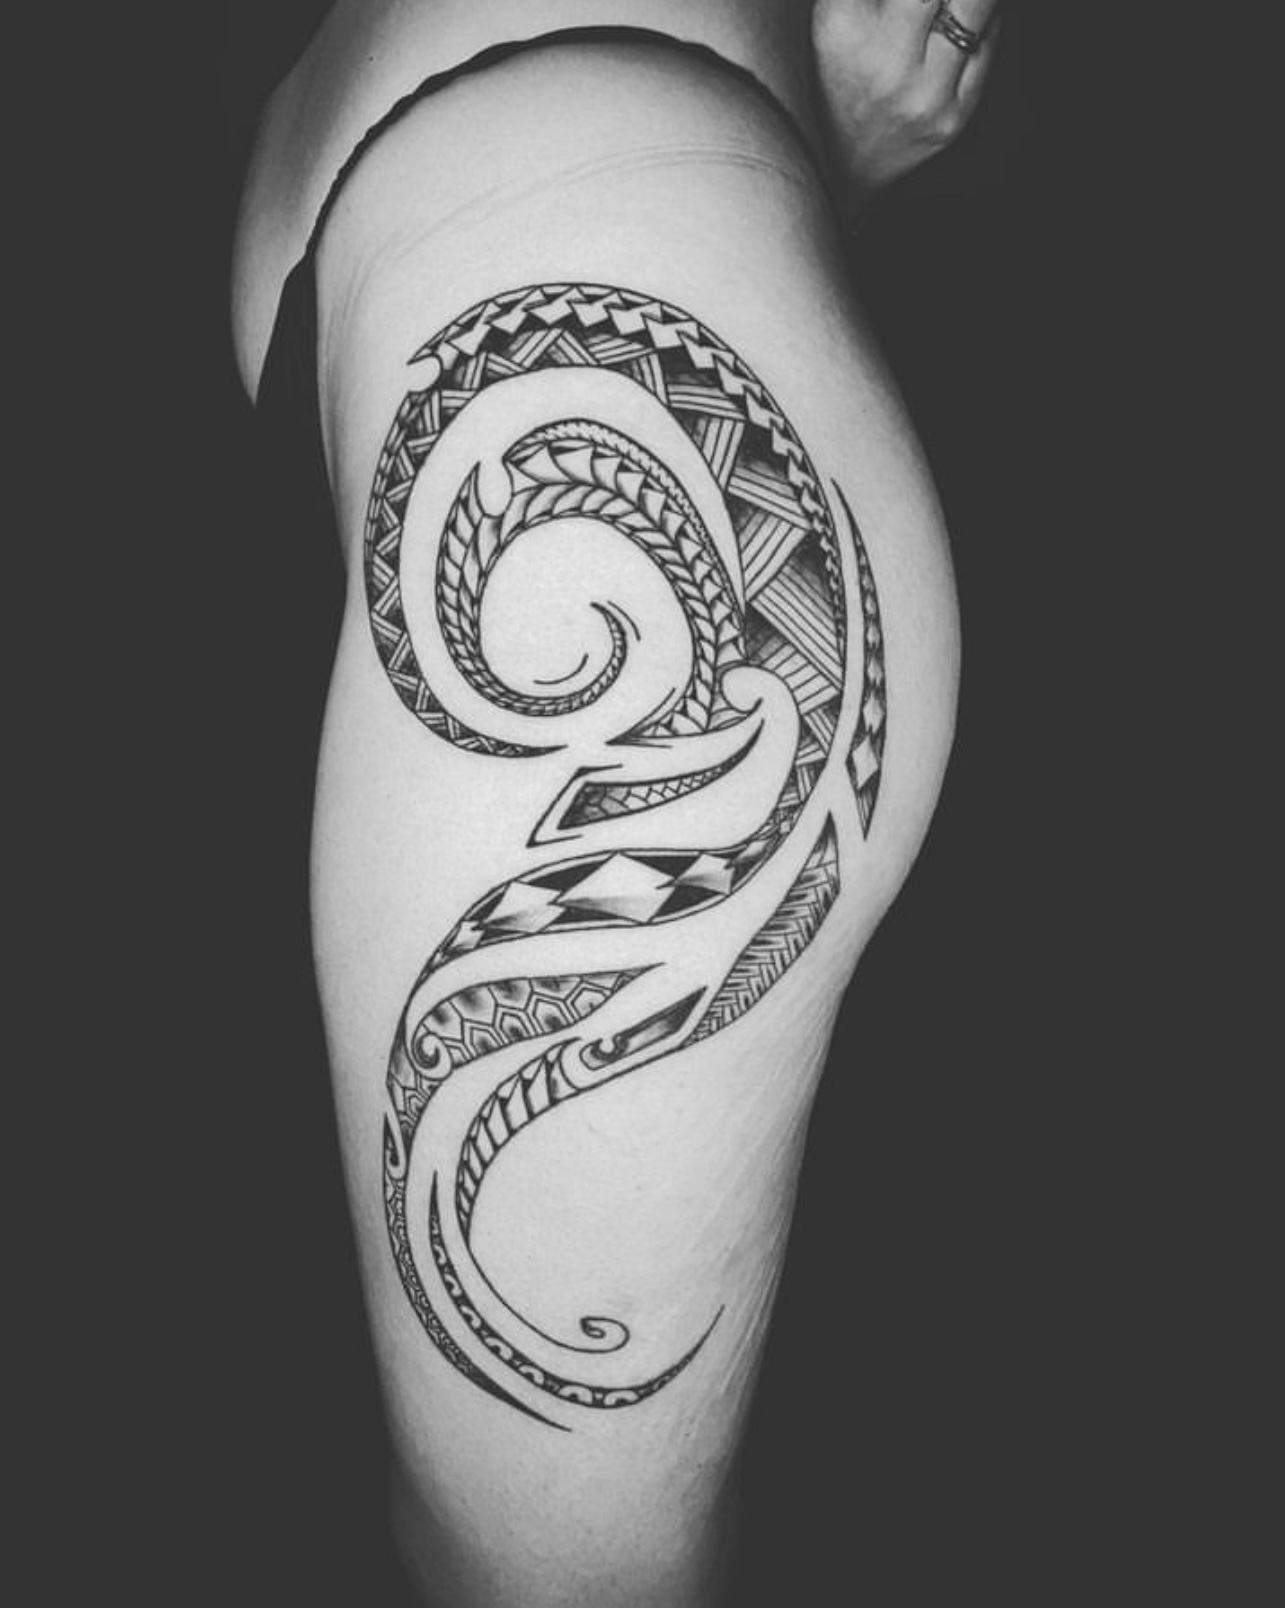 Maori Tattoo Meanings: Understanding the Symbolism and Significance - Impeccable Nest